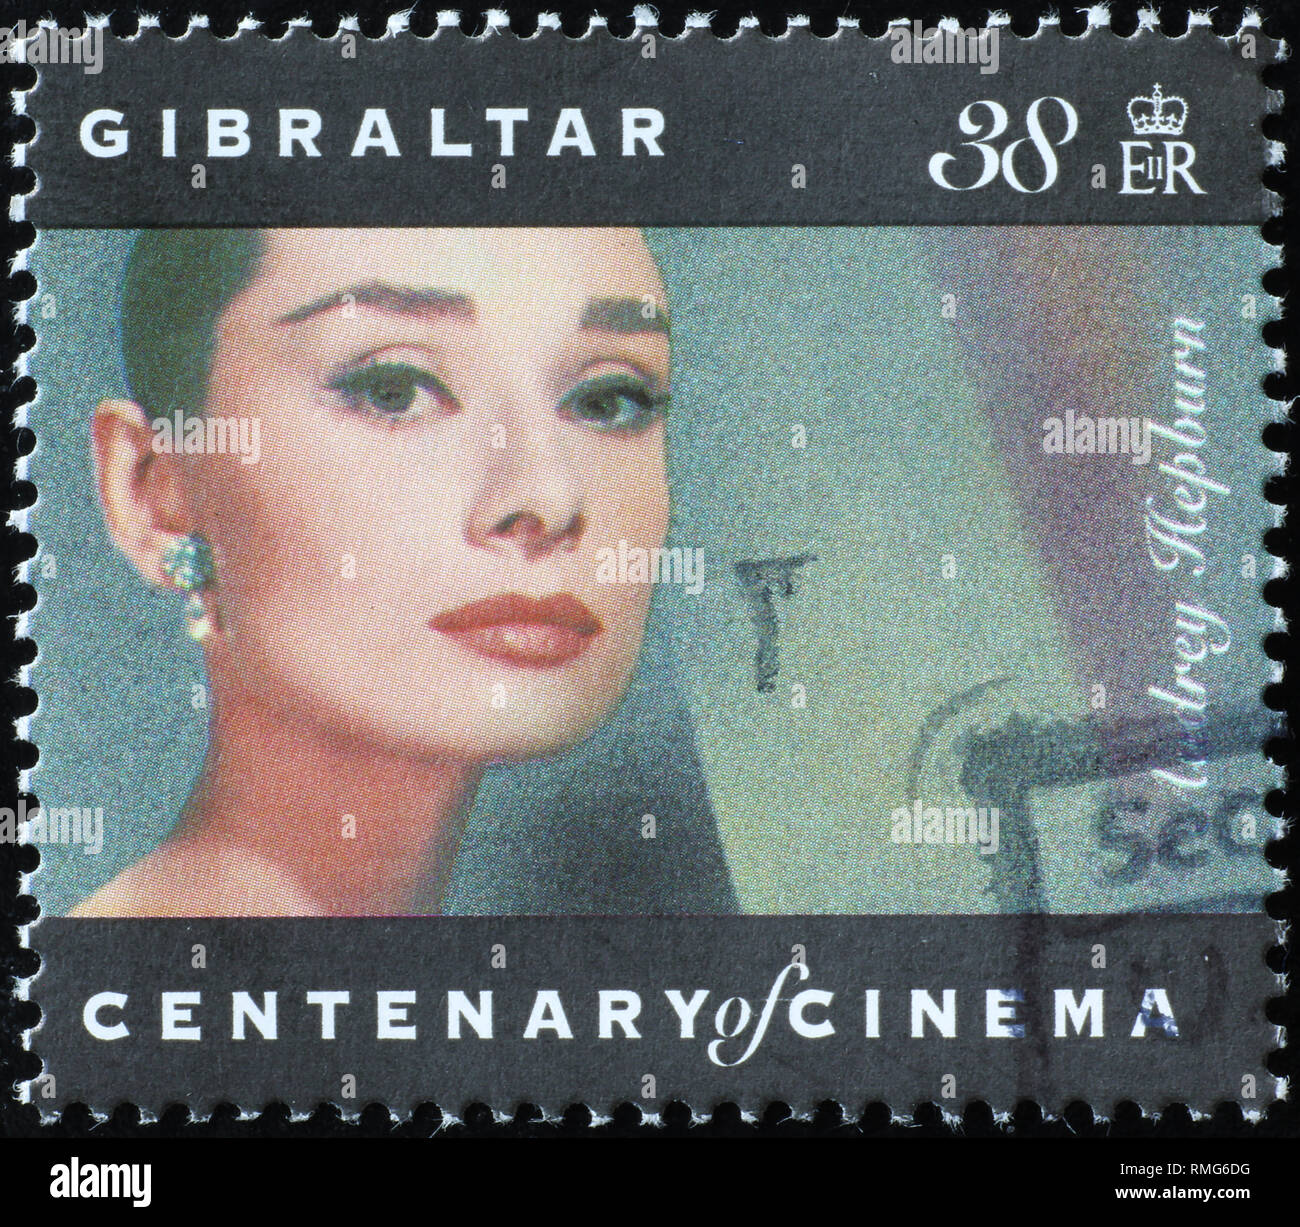 Gibraltar Stamp Hi Res Stock Photography And Images Page 2 Alamy